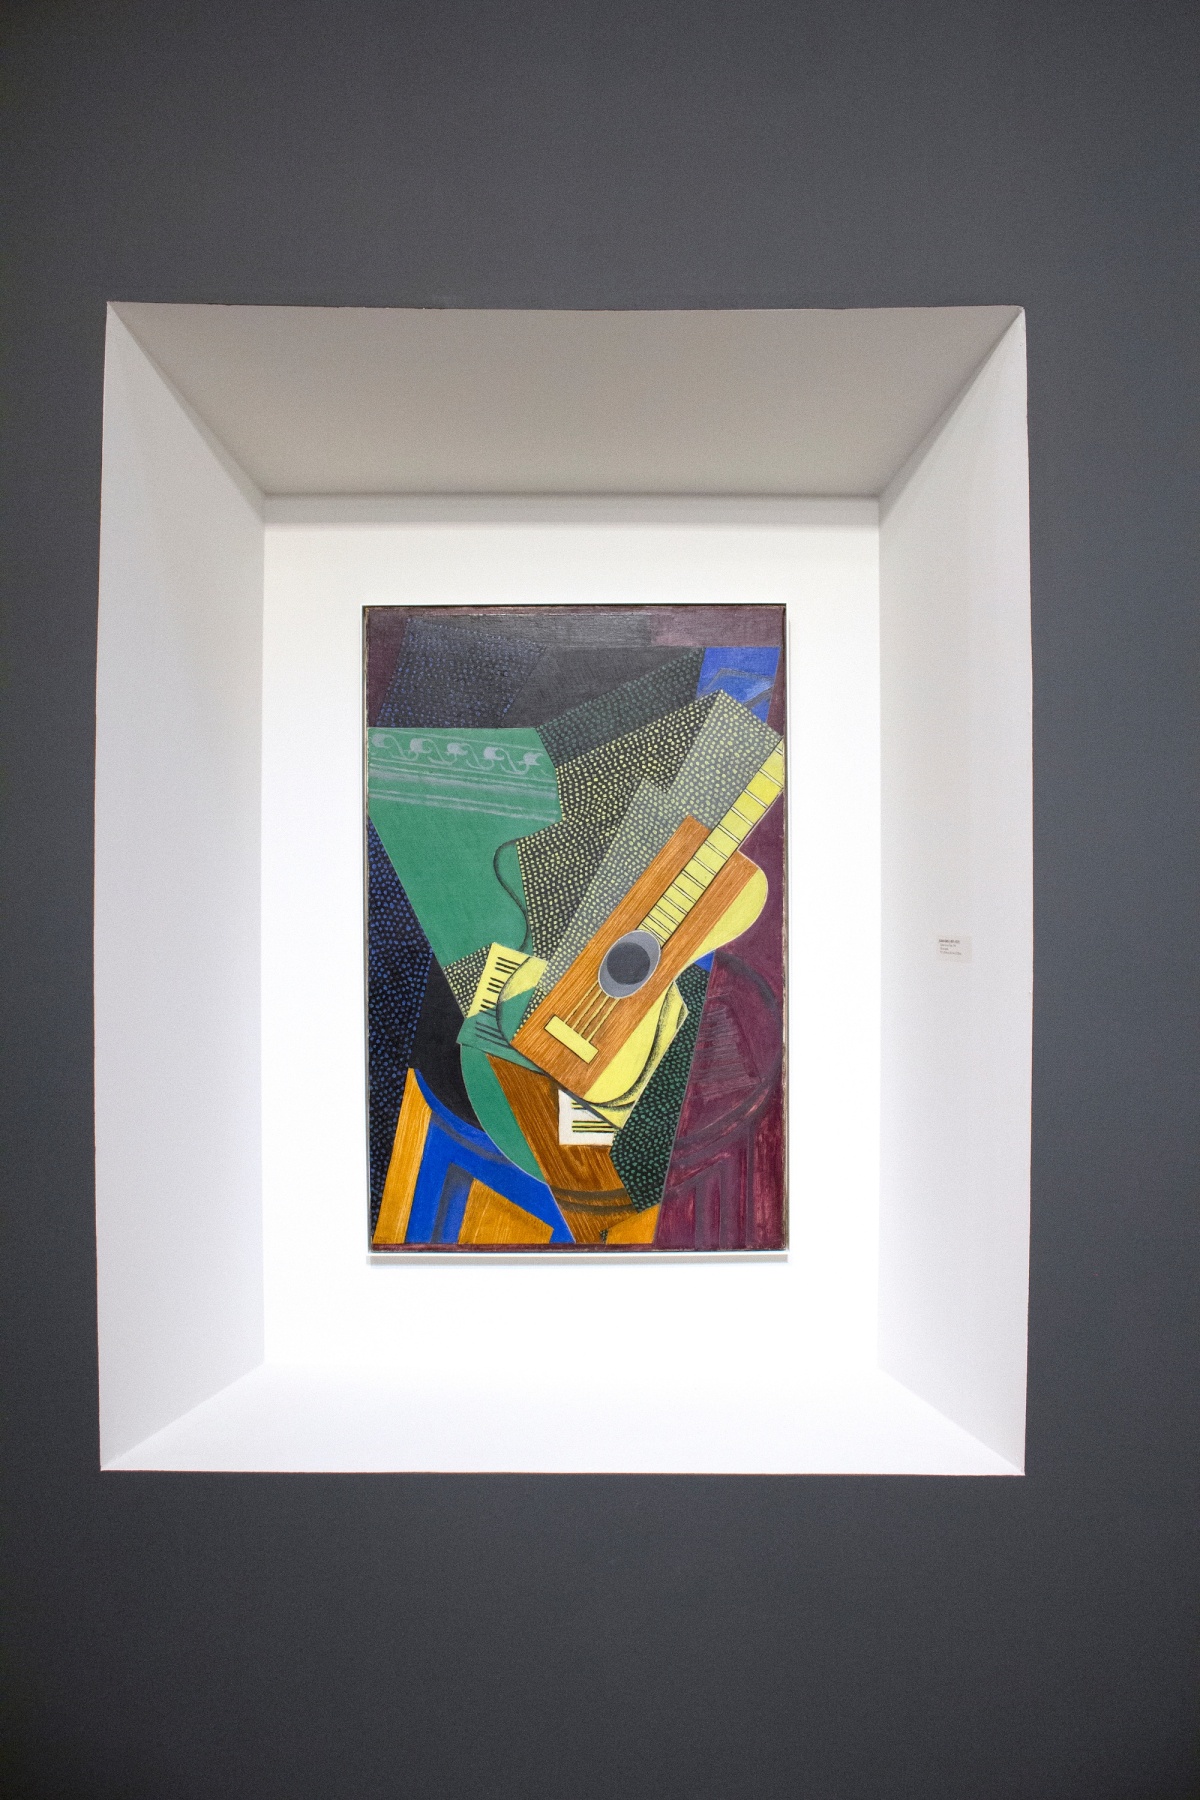 Installation view of The Climax of Cubism, booth 301 at TEFAF Spring 2019. &copy;Helly Nahmad Gallery NY. Photography by Studio MDA. This photo features a painting by Juan gris, Guitare sur une Table, 1916